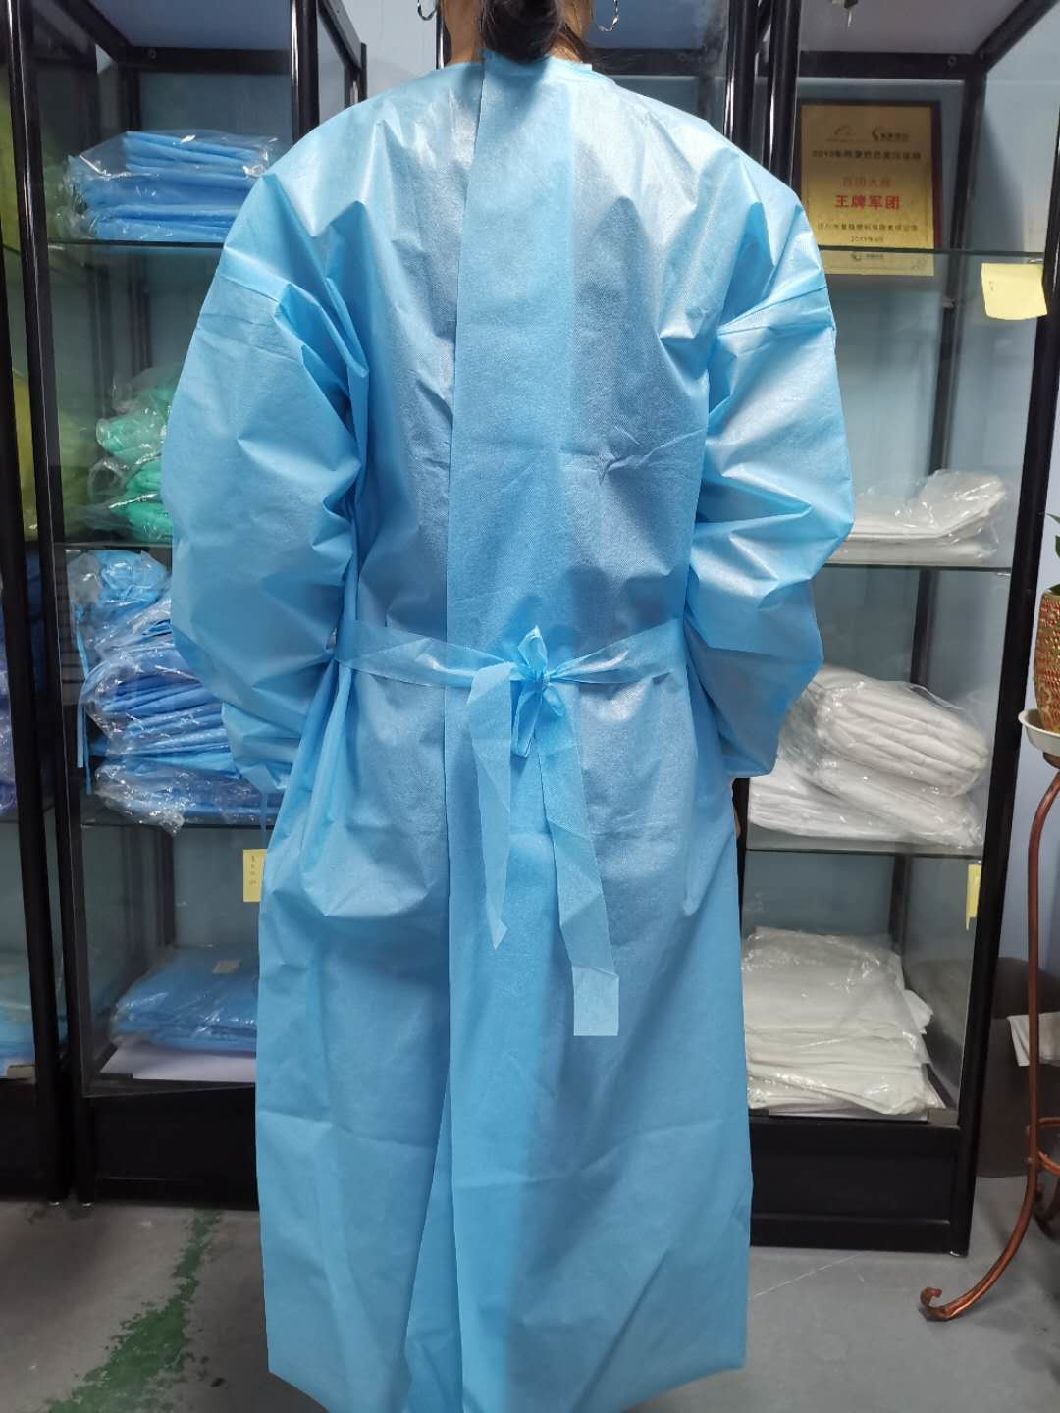 Disposable Isolation Anti-Bacterial Protective Waterproof and Anti-Fouling Aprons